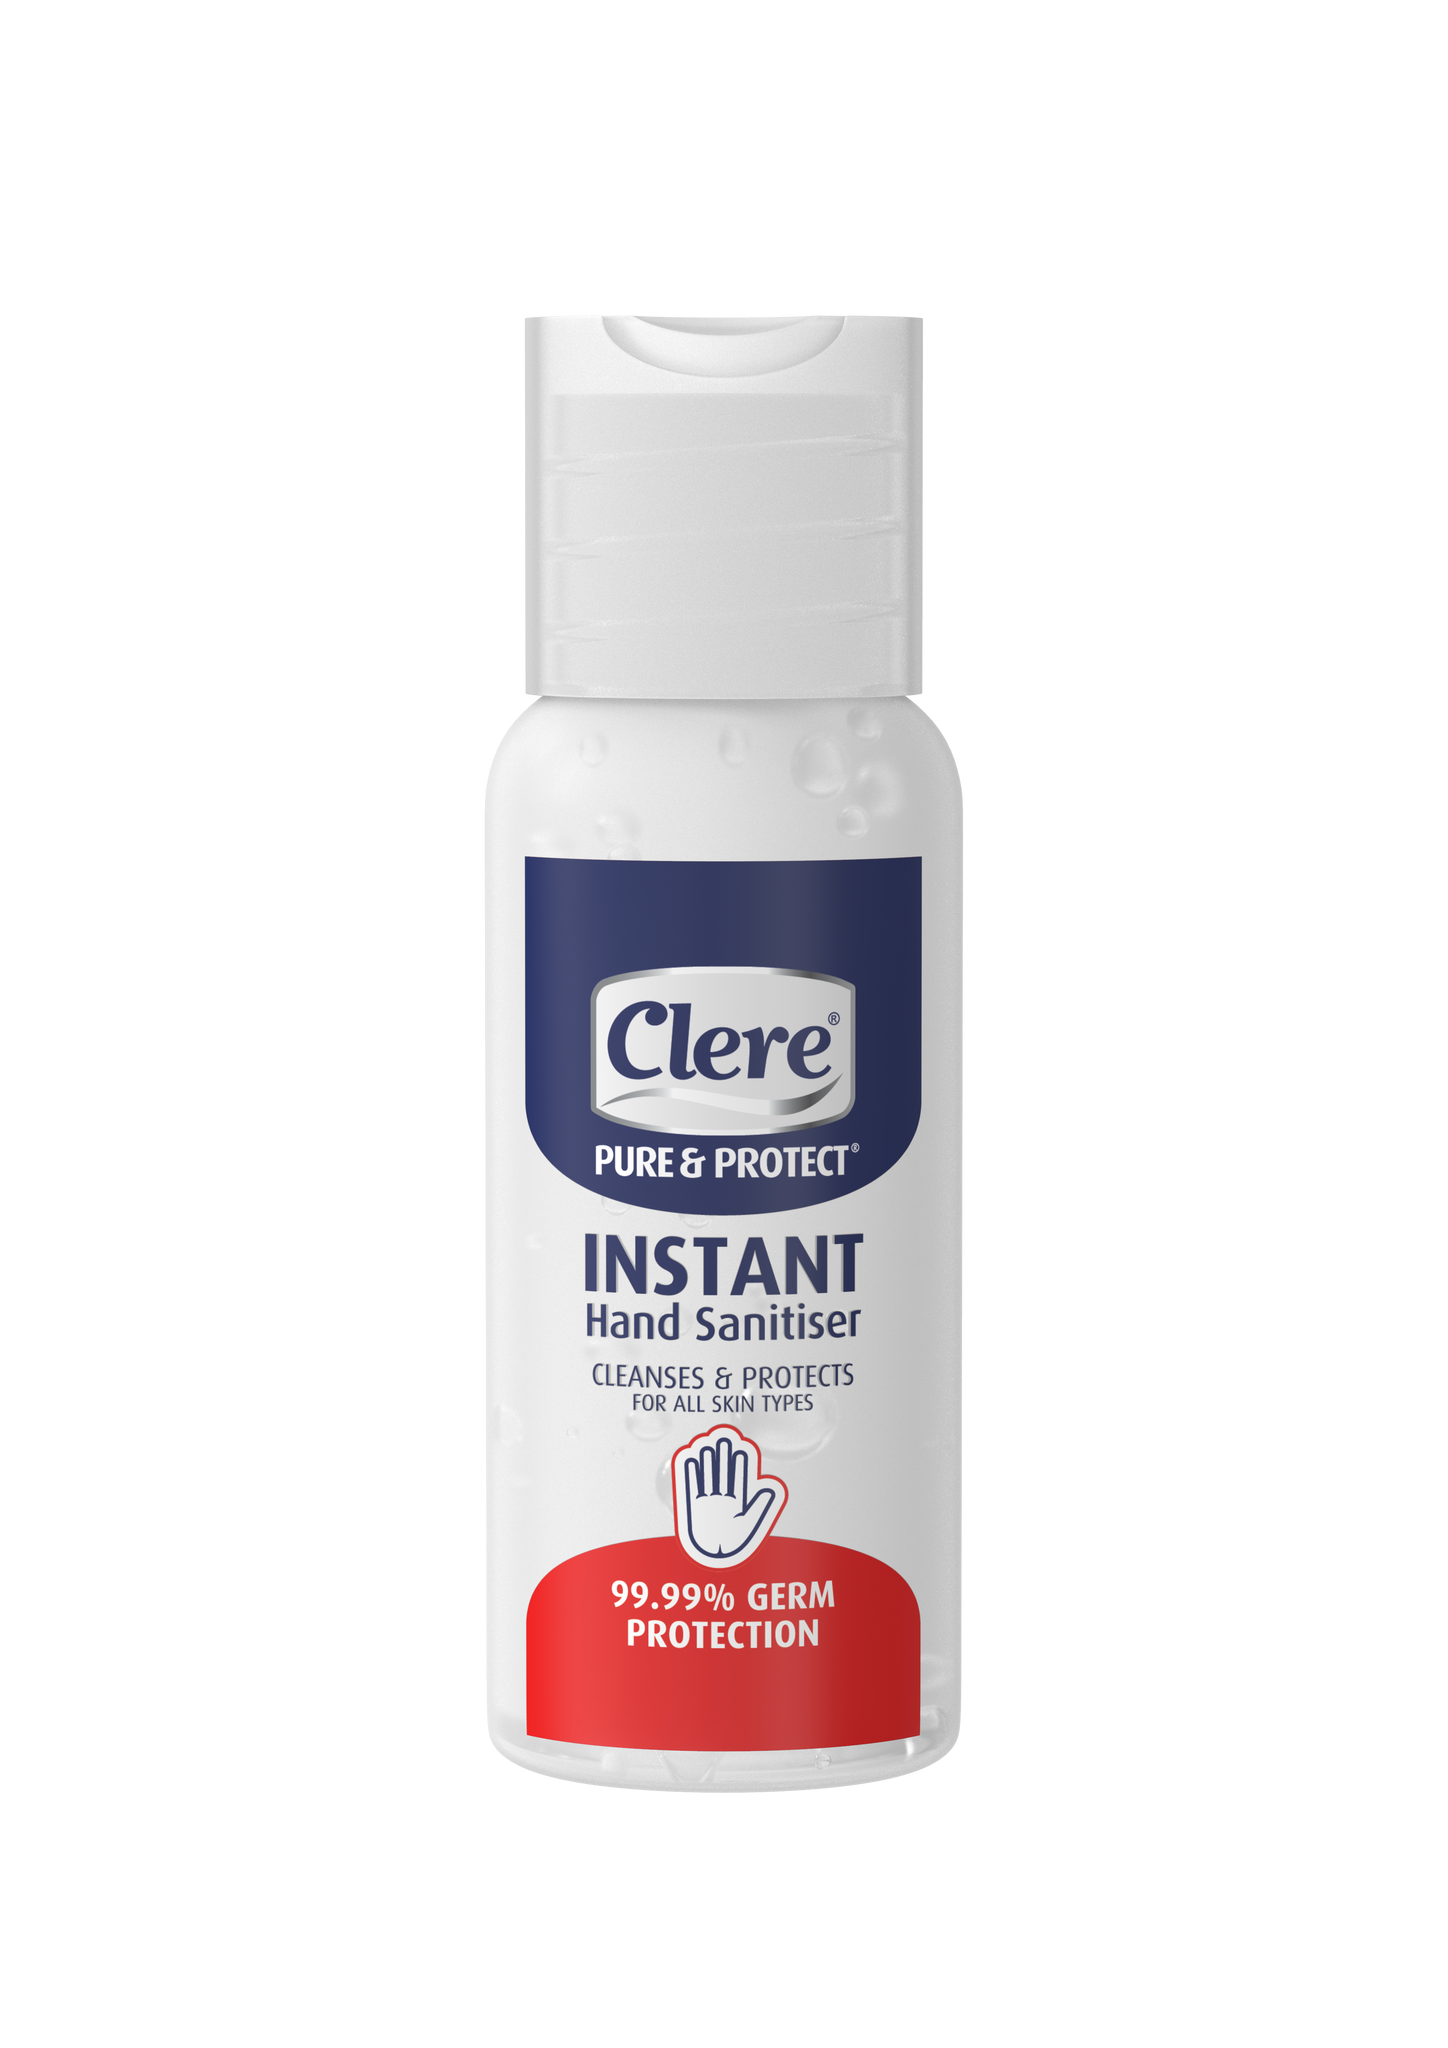 Clere Pure & Protect Instant Hand Sanitiser (Round bottle) - Gel - 60ml